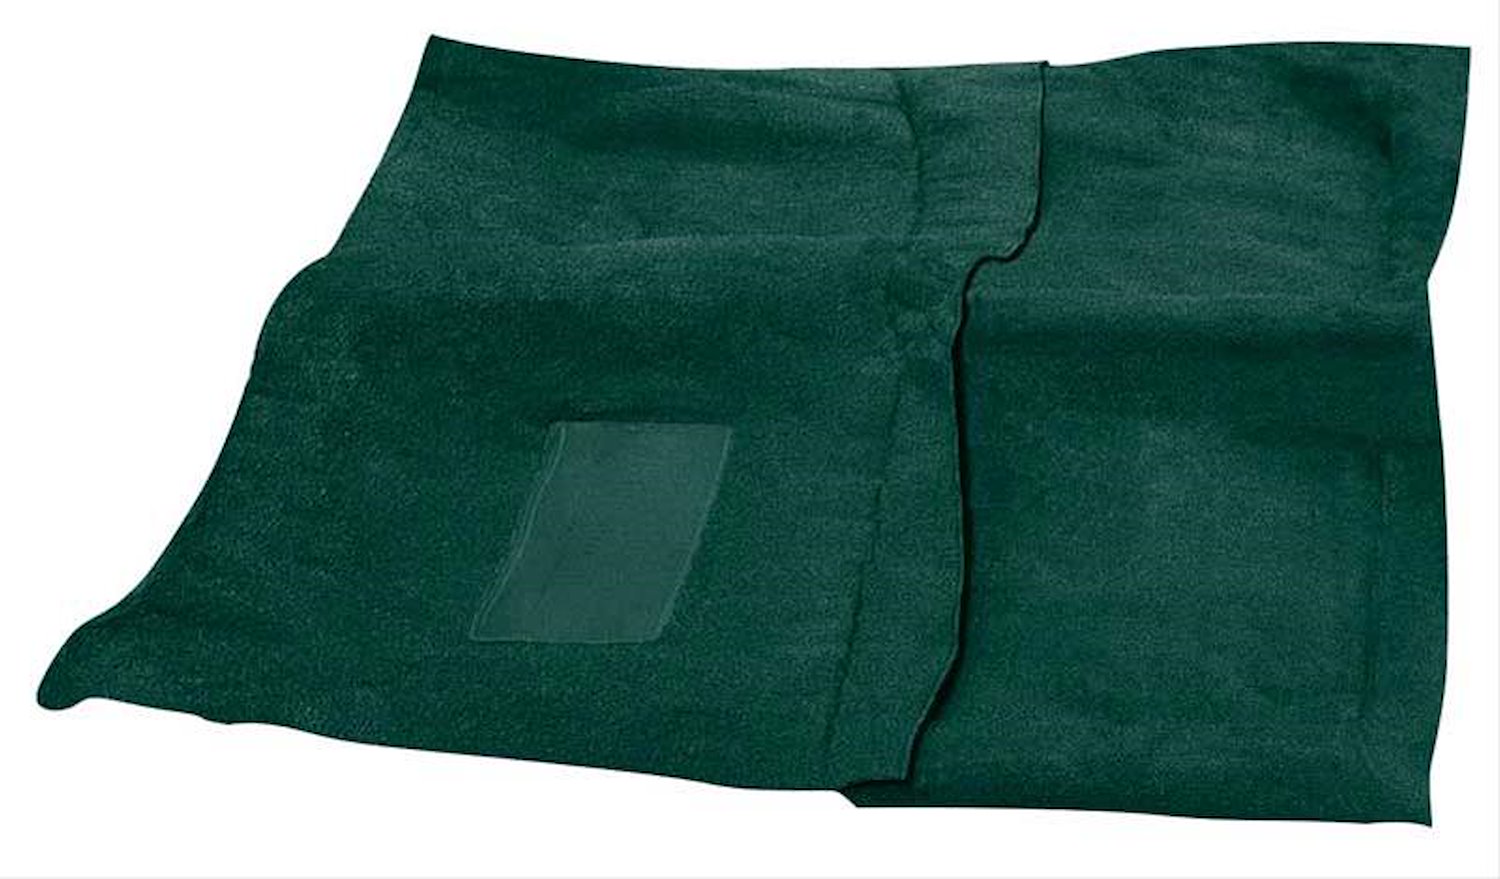 MA531508 Loop Carpet With Tails 1967-69 Dodge Dart Convertible With Auto Trans Dark Green